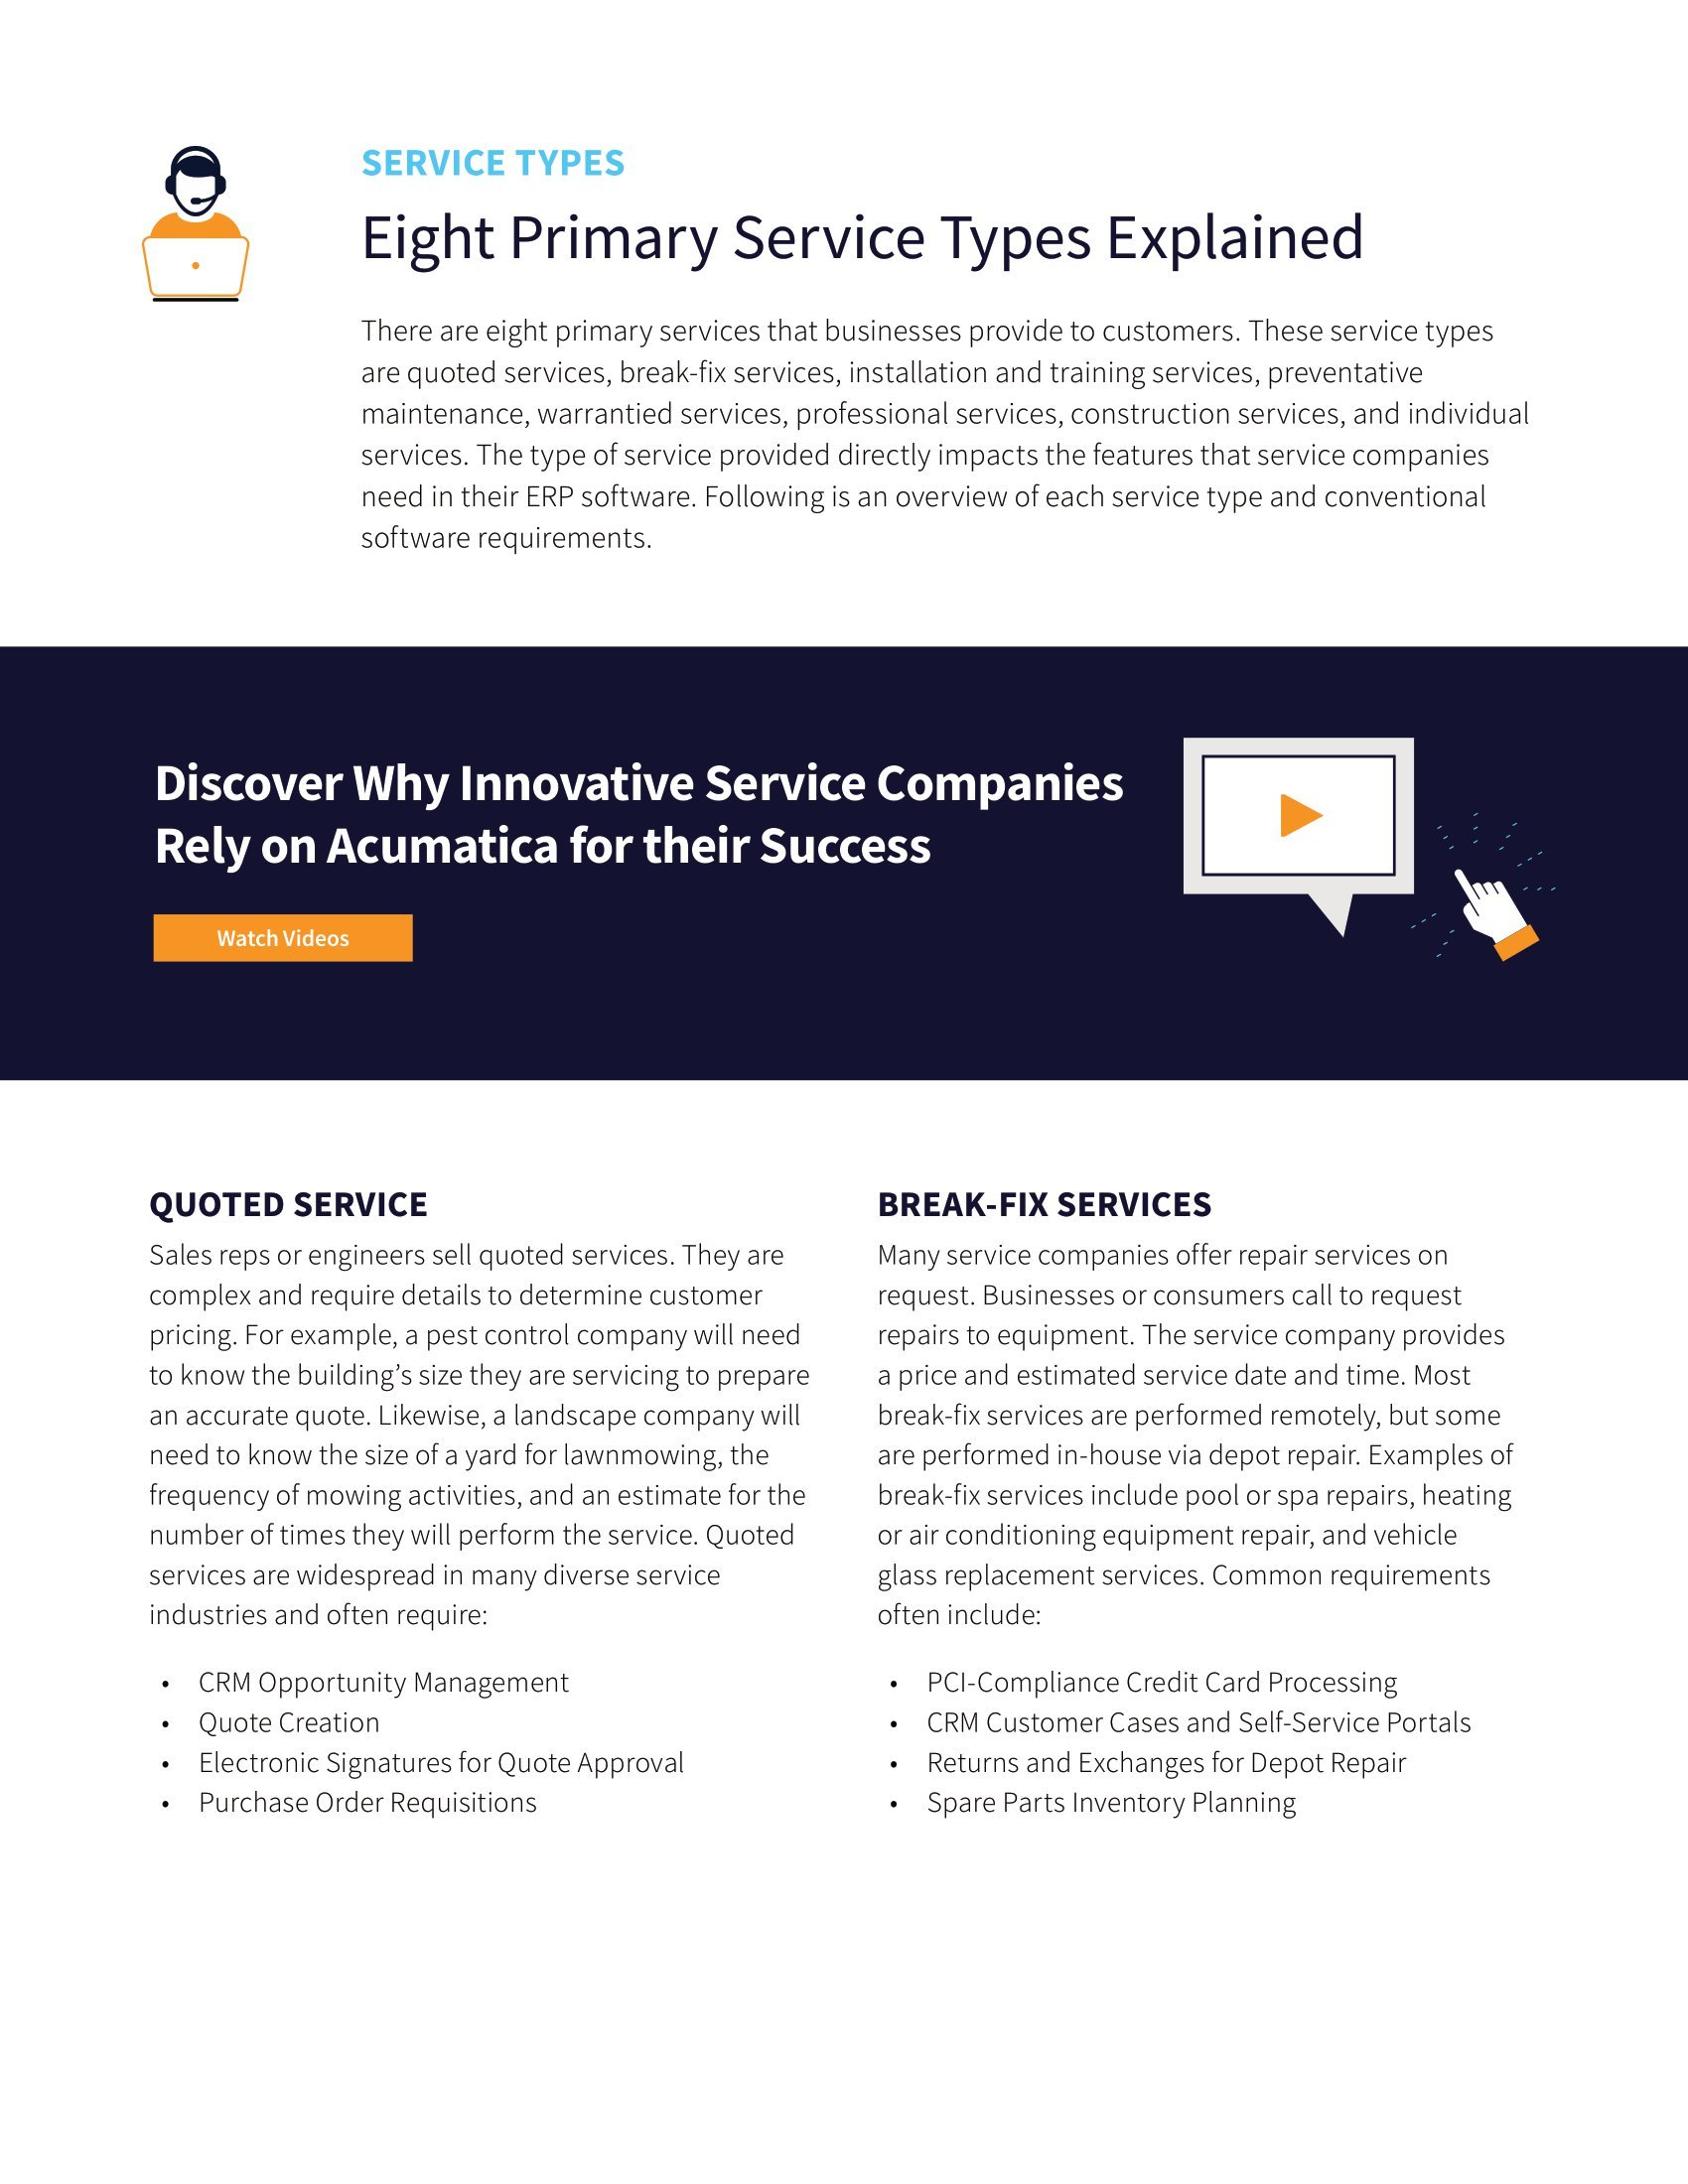 Drive Growth with Cloud Service Management Applications, page 2